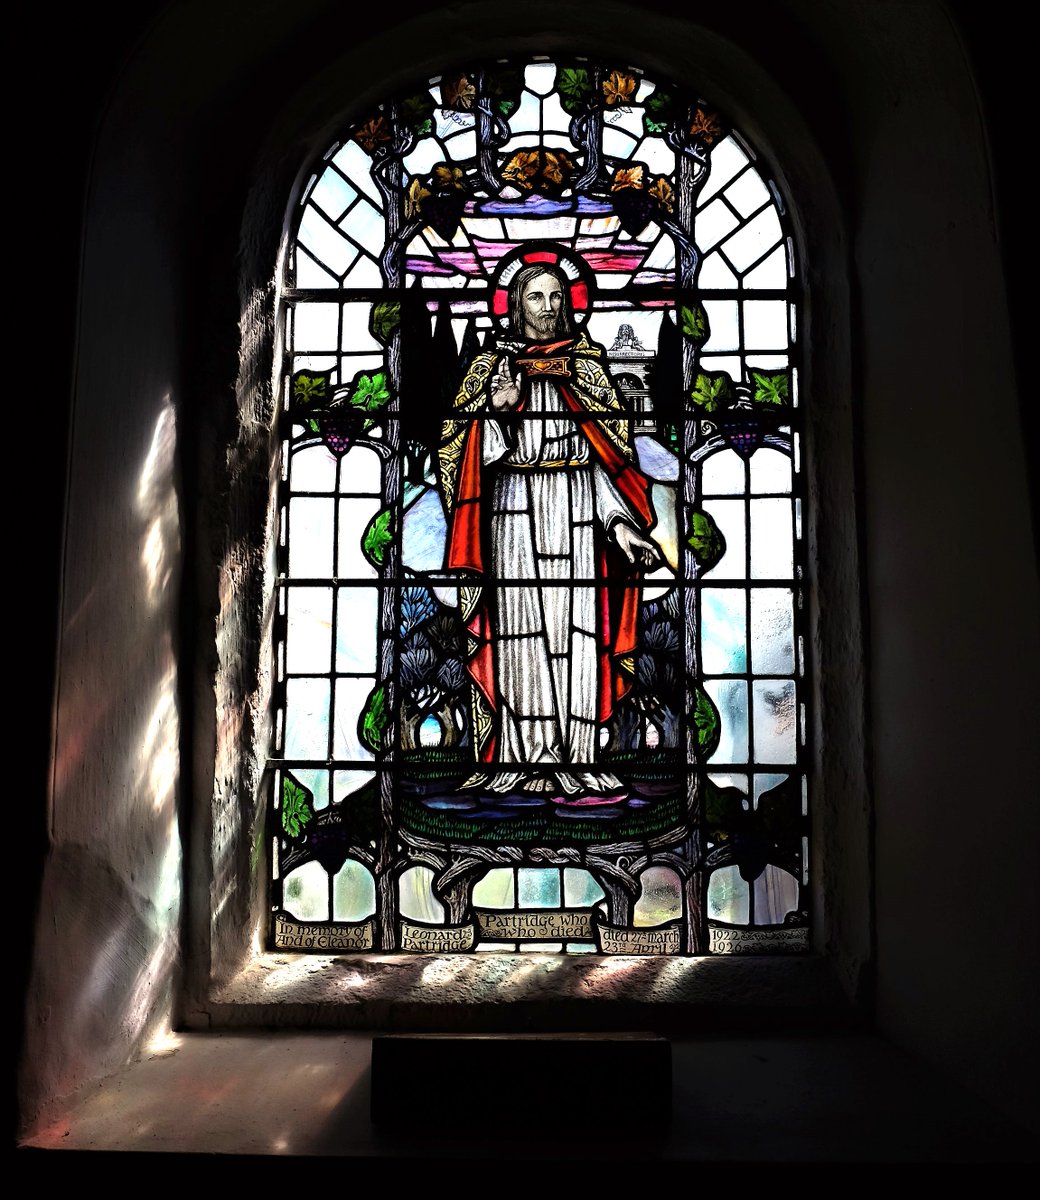 Nymet Rowland #Devon 
Memorial window to Leonard Partridge d.1922 and Eleanor Partridge d.1926 by Veronica Whall, in this tiny but interesting church. 📸: my own @BSMGP @CathyRLowe #StainedGlassEveryday